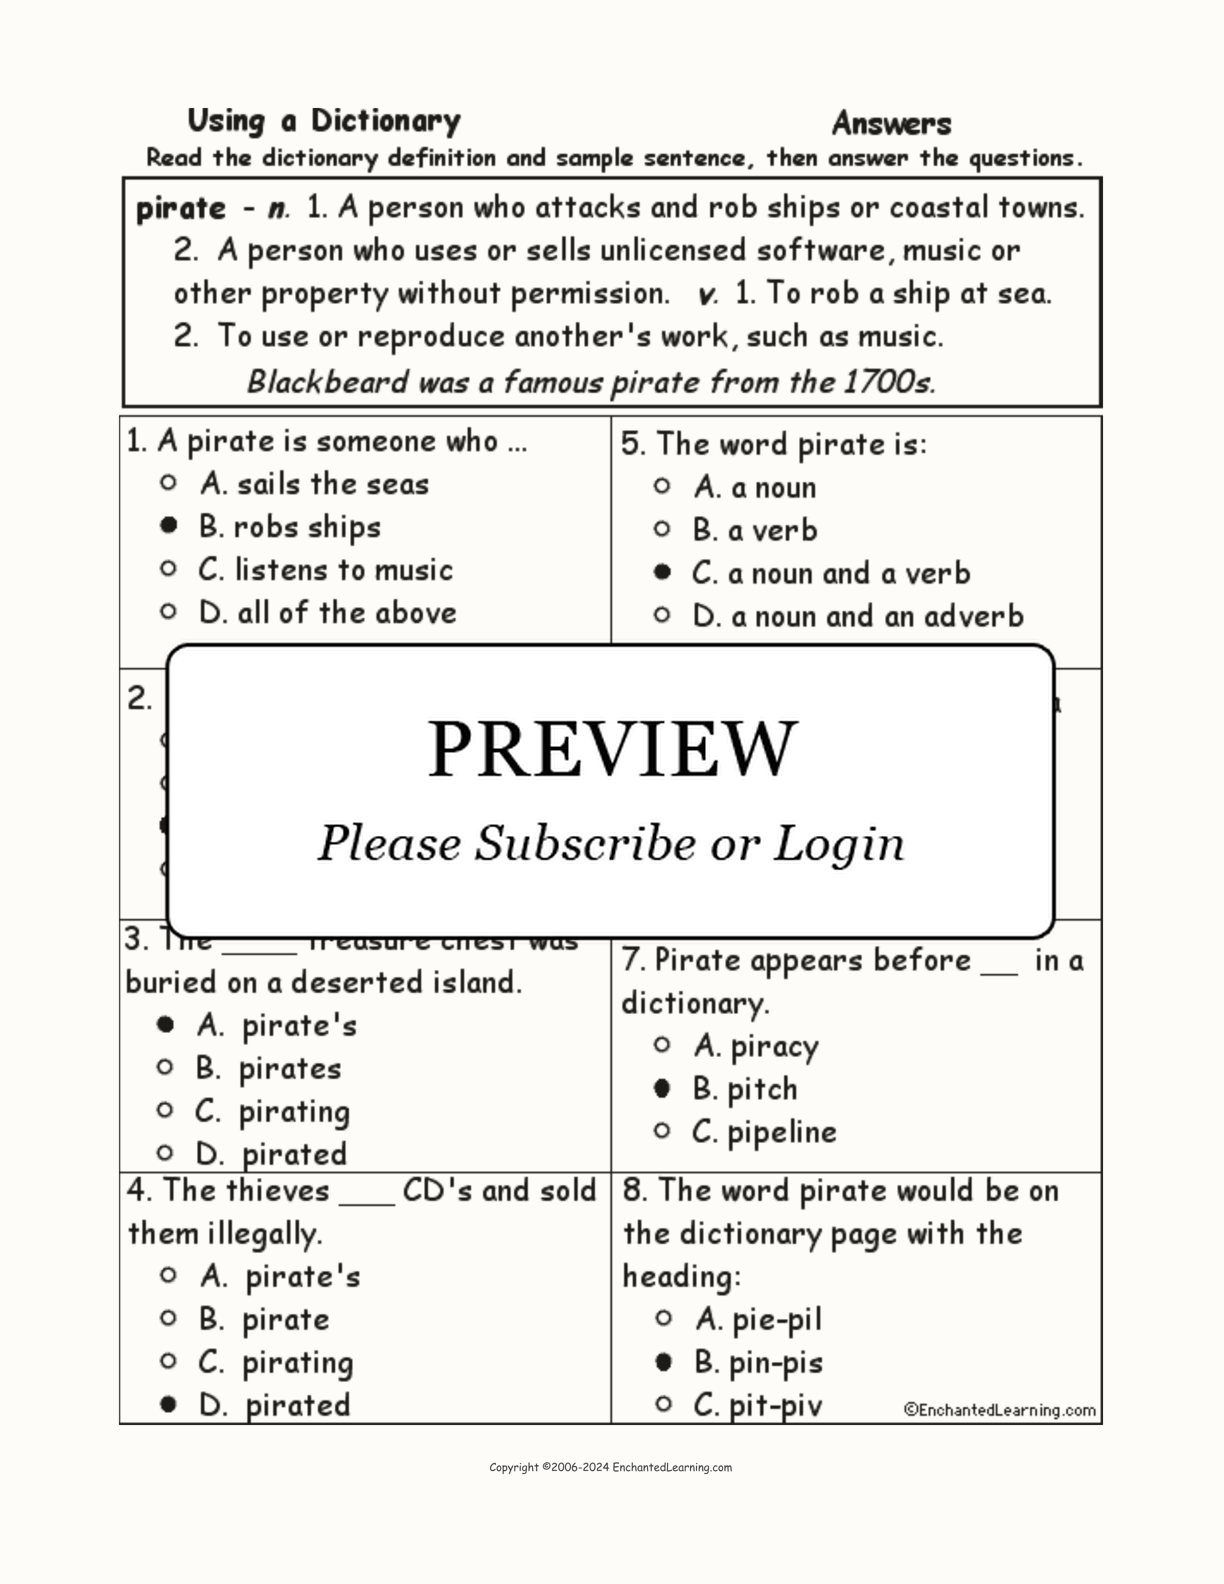 Pirate Definition - Multiple Choice Comprehension Quiz interactive worksheet page 2